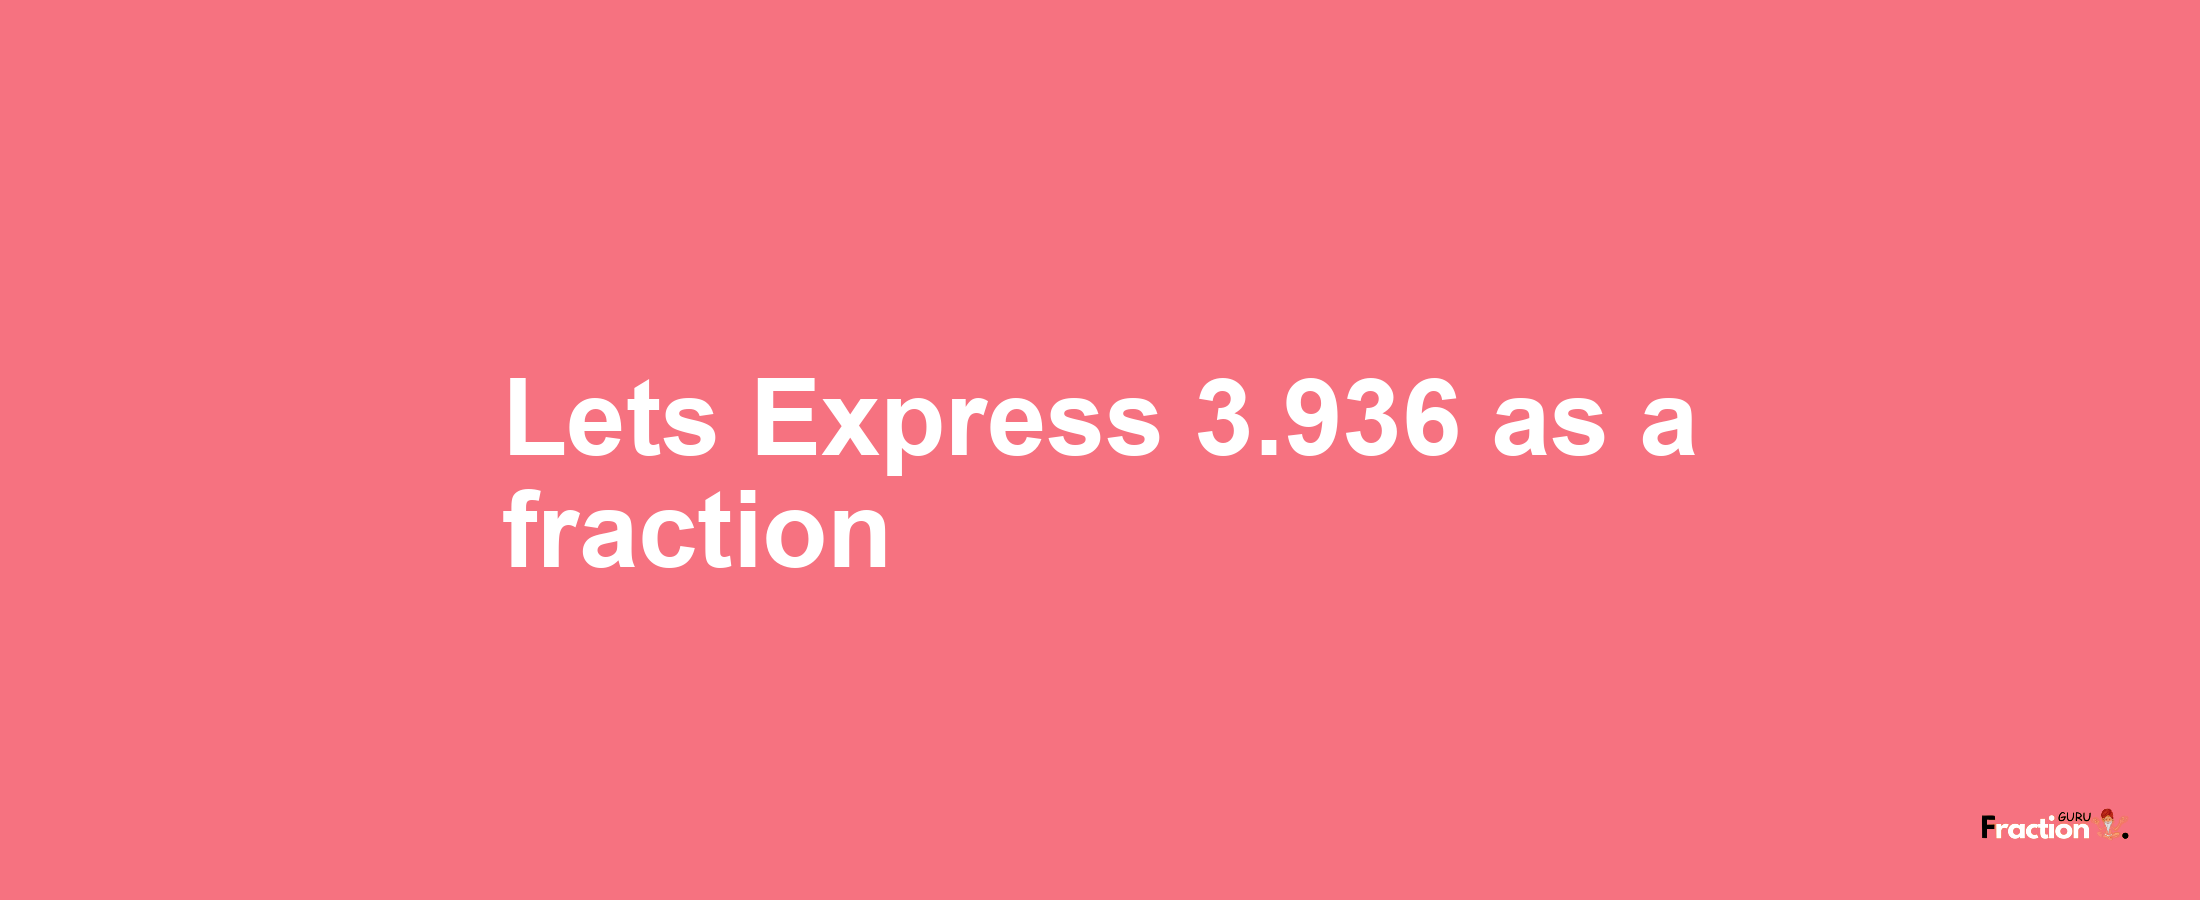 Lets Express 3.936 as afraction